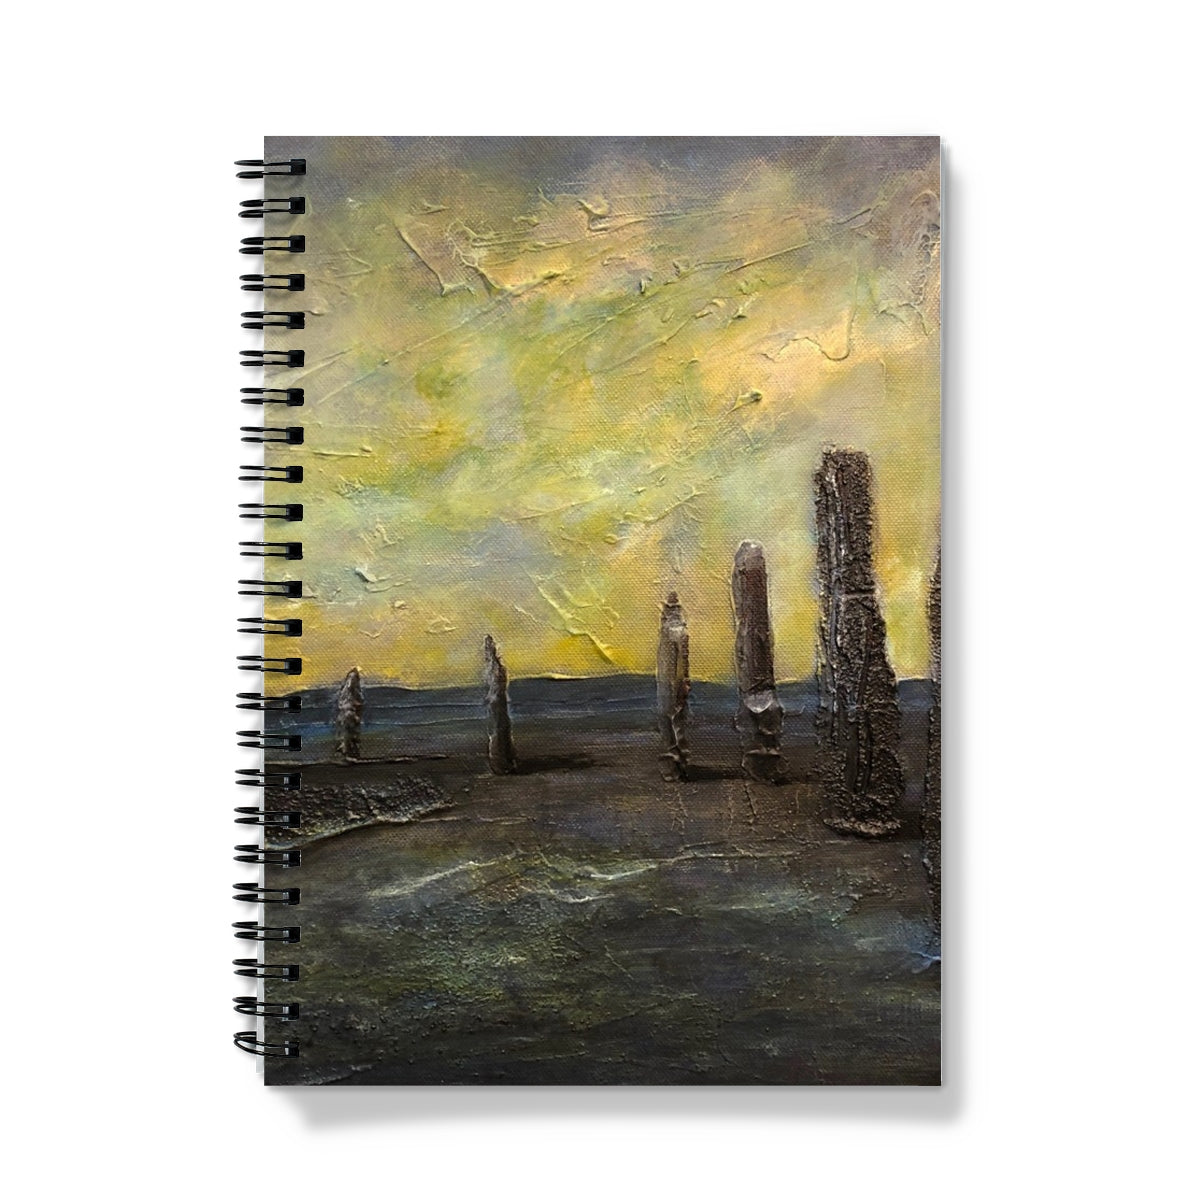 An Ethereal Ring Of Brodgar Art Gifts Notebook-Journals & Notebooks-Orkney Art Gallery-A4-Lined-Paintings, Prints, Homeware, Art Gifts From Scotland By Scottish Artist Kevin Hunter